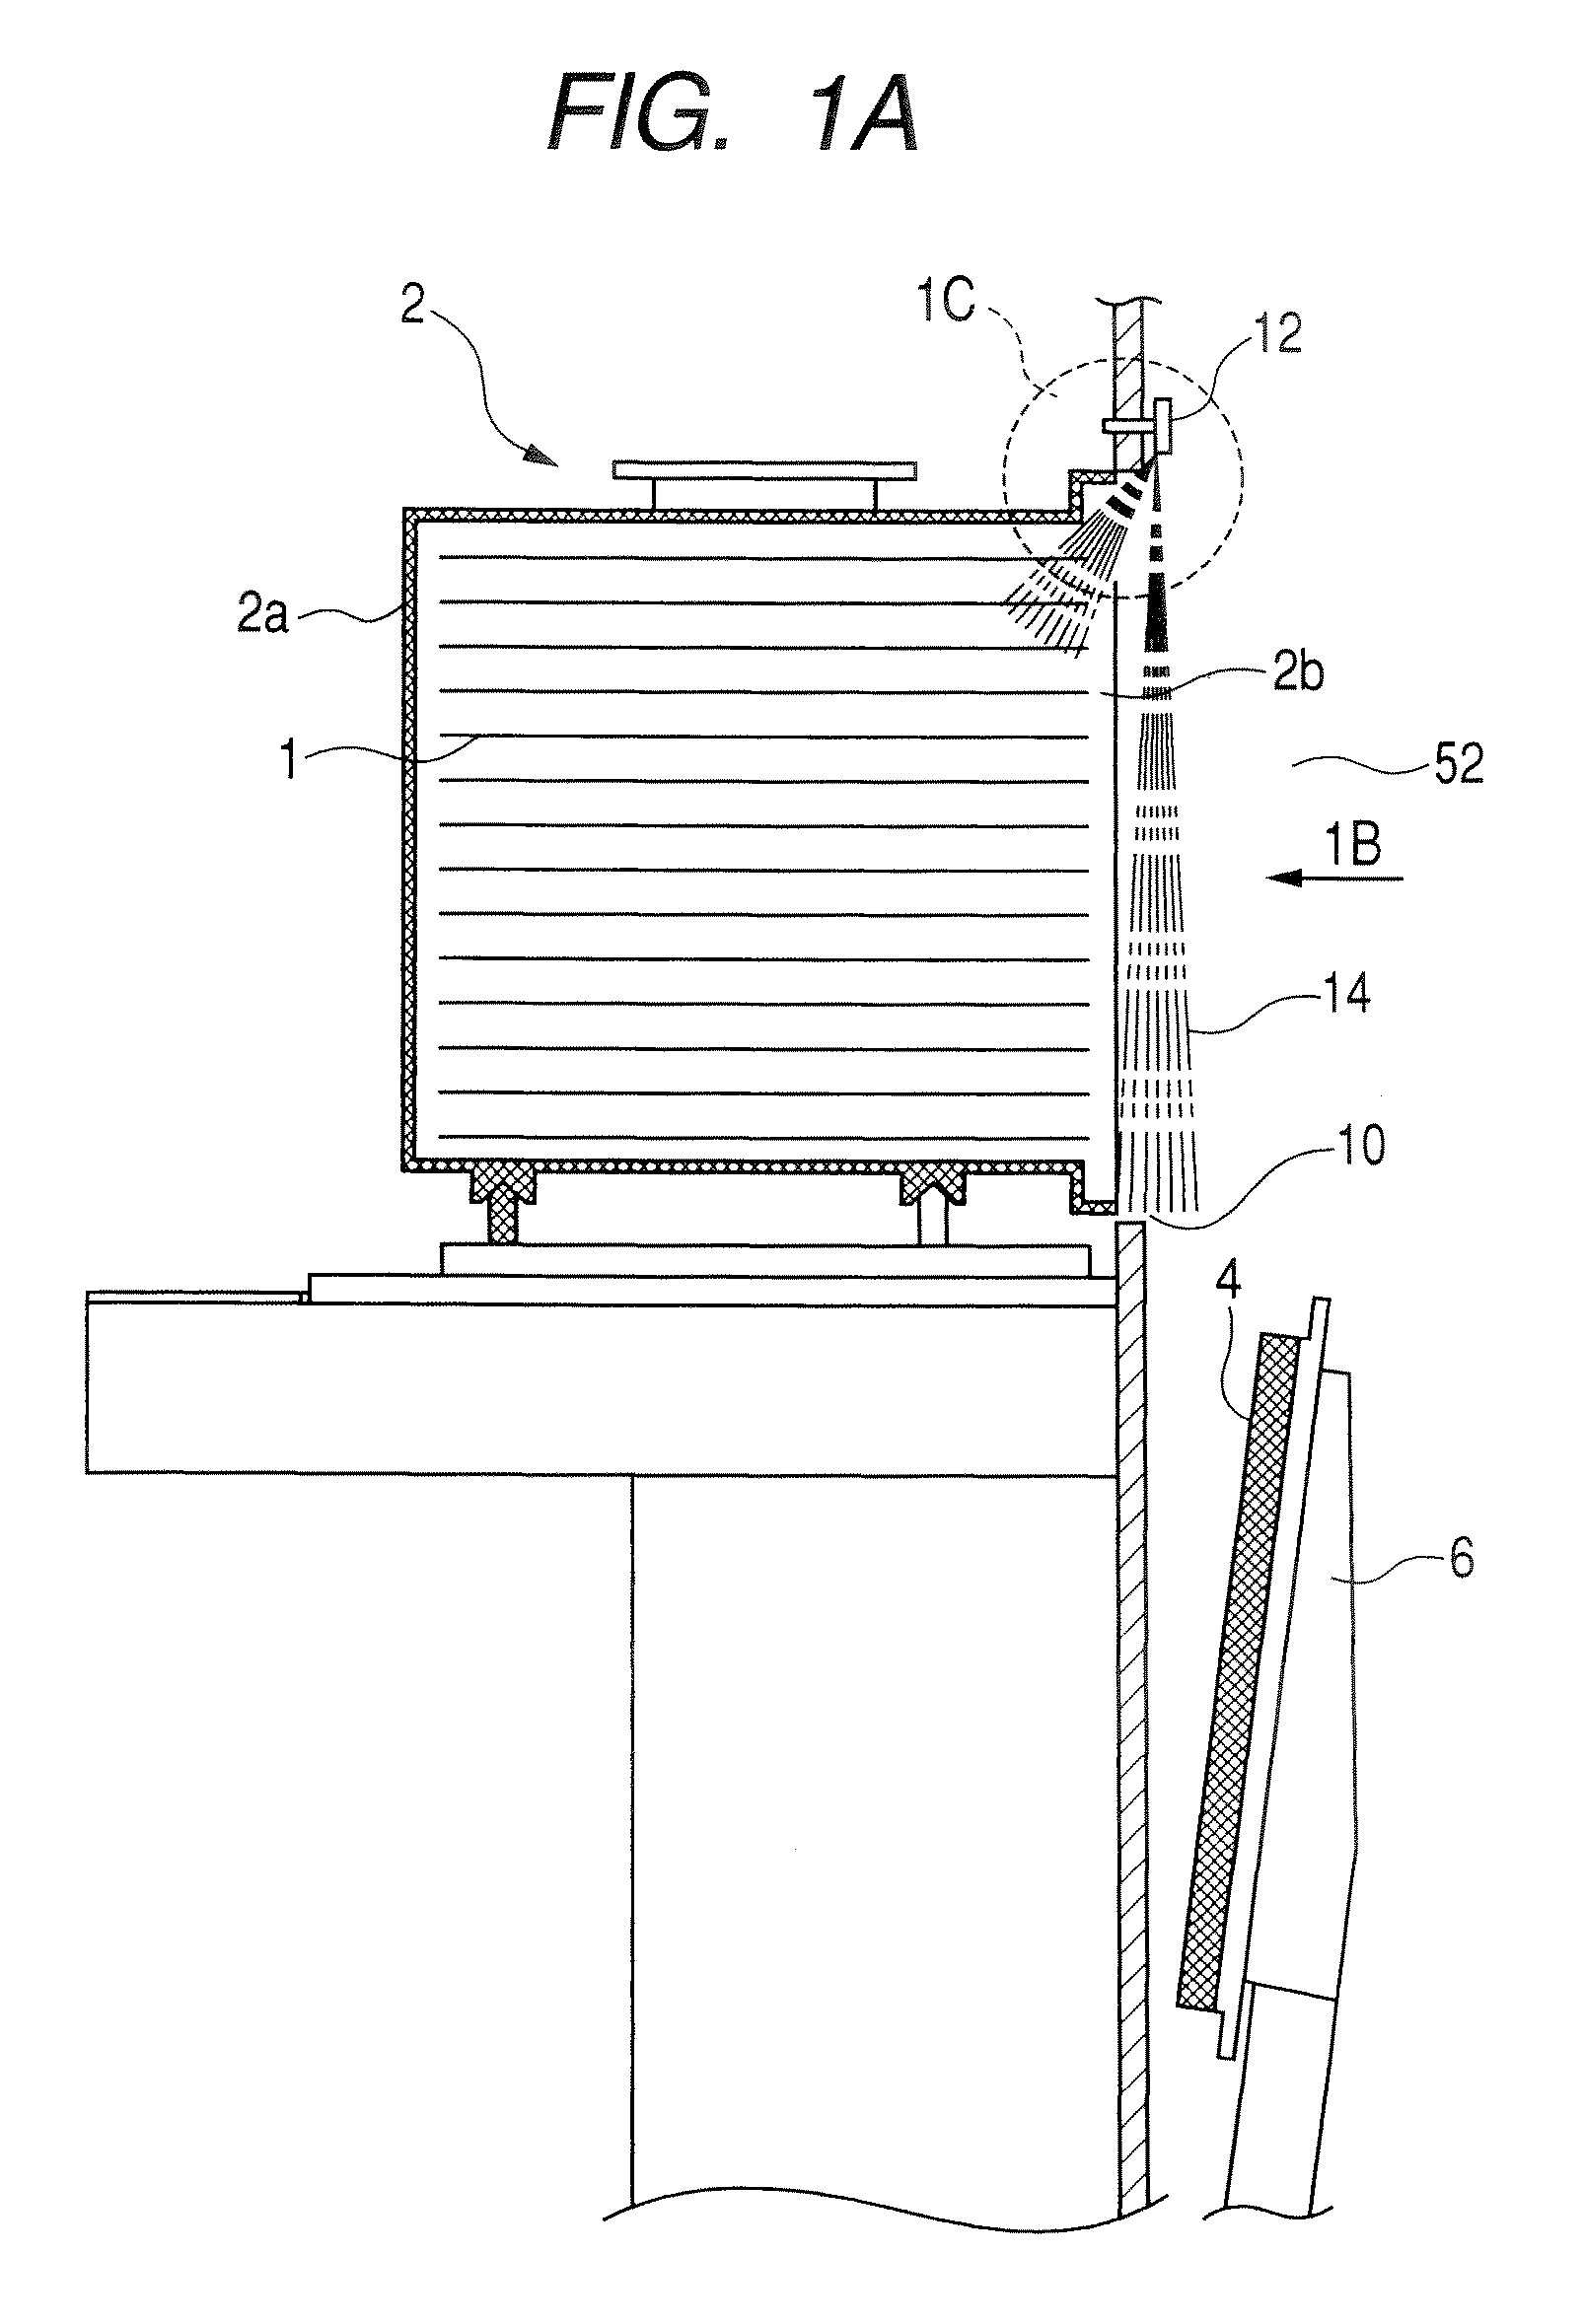 Lid opening/closing system of an airtight container